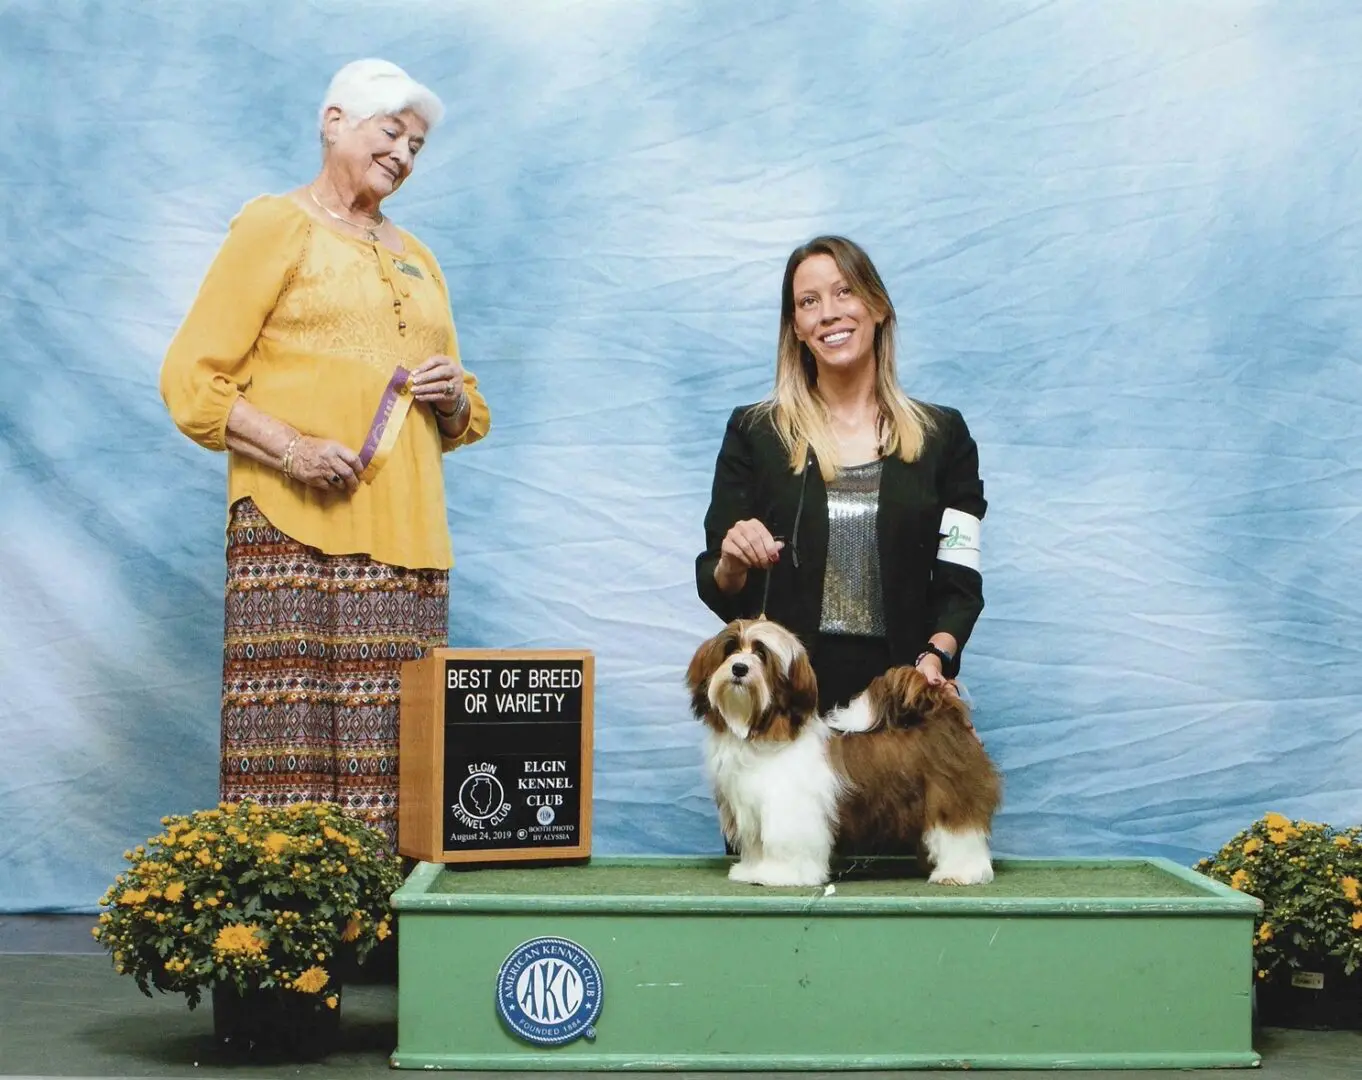 A woman is standing next to a Havanese dog at a dog show.